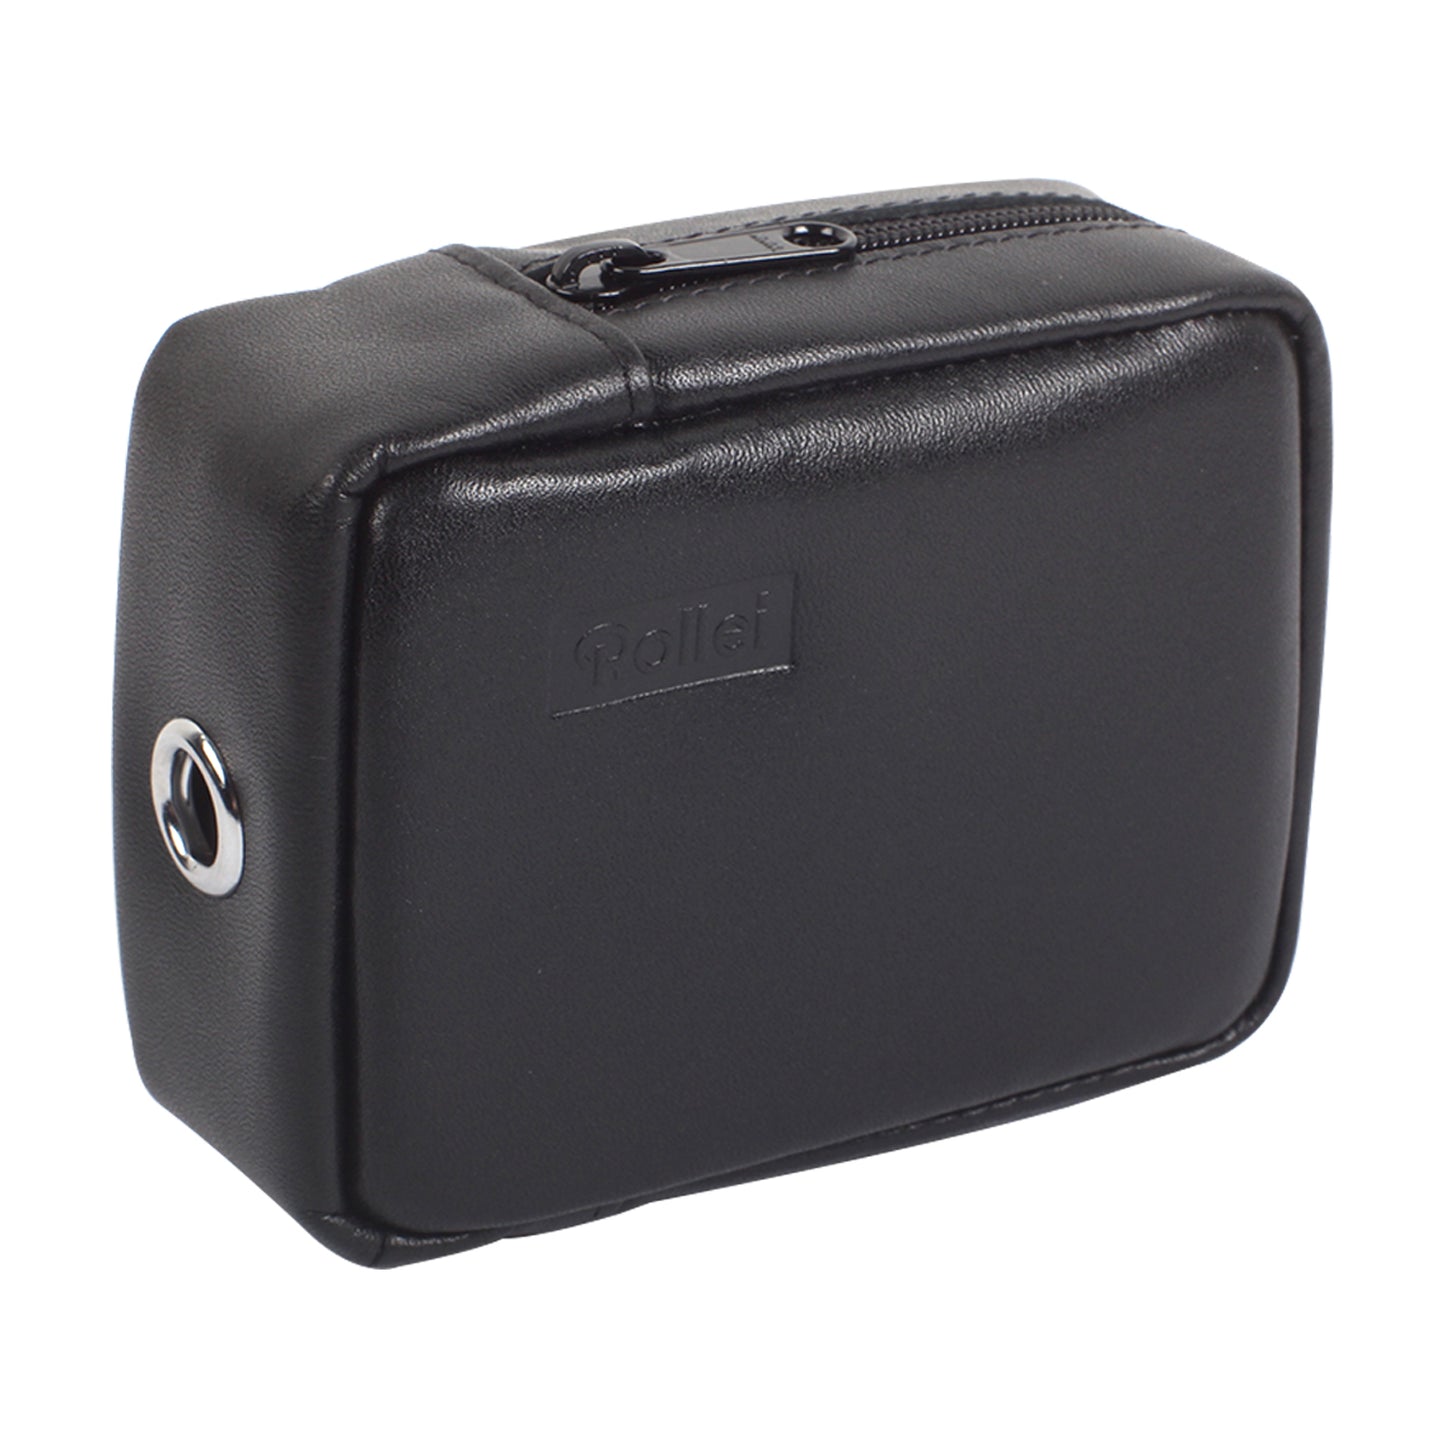 Camera Case Soft Leather Cover Pouch Portable Bag For Rollei 35 35T 35S 35SE